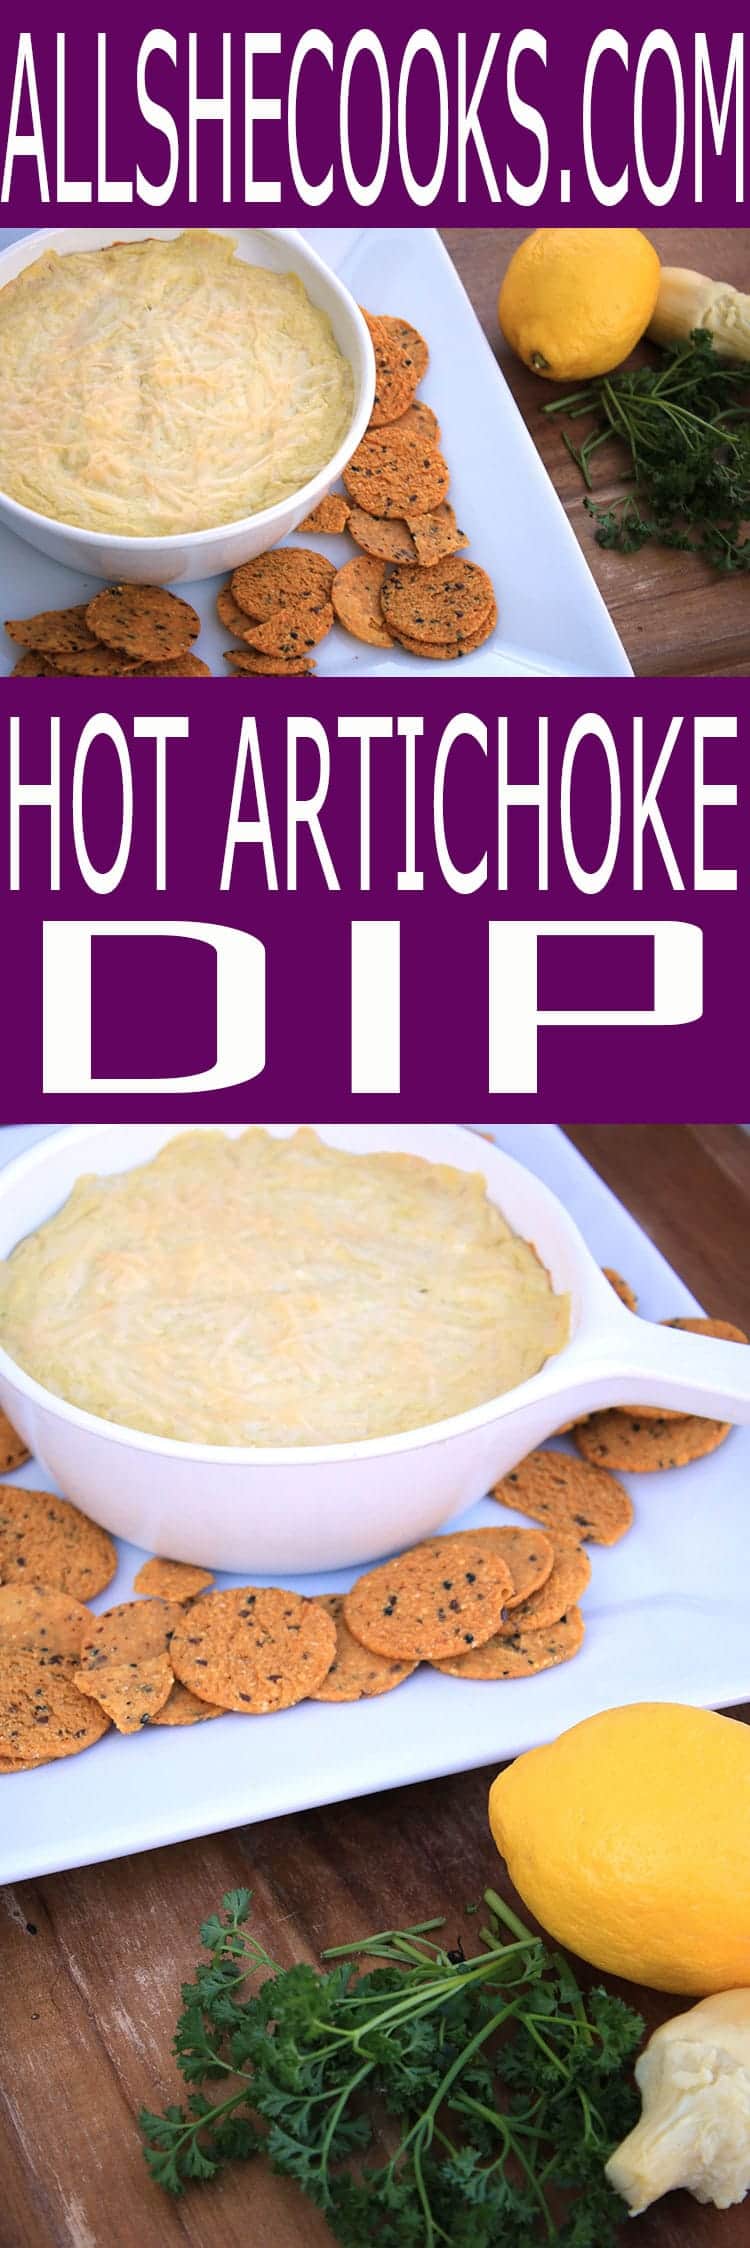 This is the best hot artichoke dip recipe. Flavored with lemon, cheese and garlic, it's low fat and delicous.